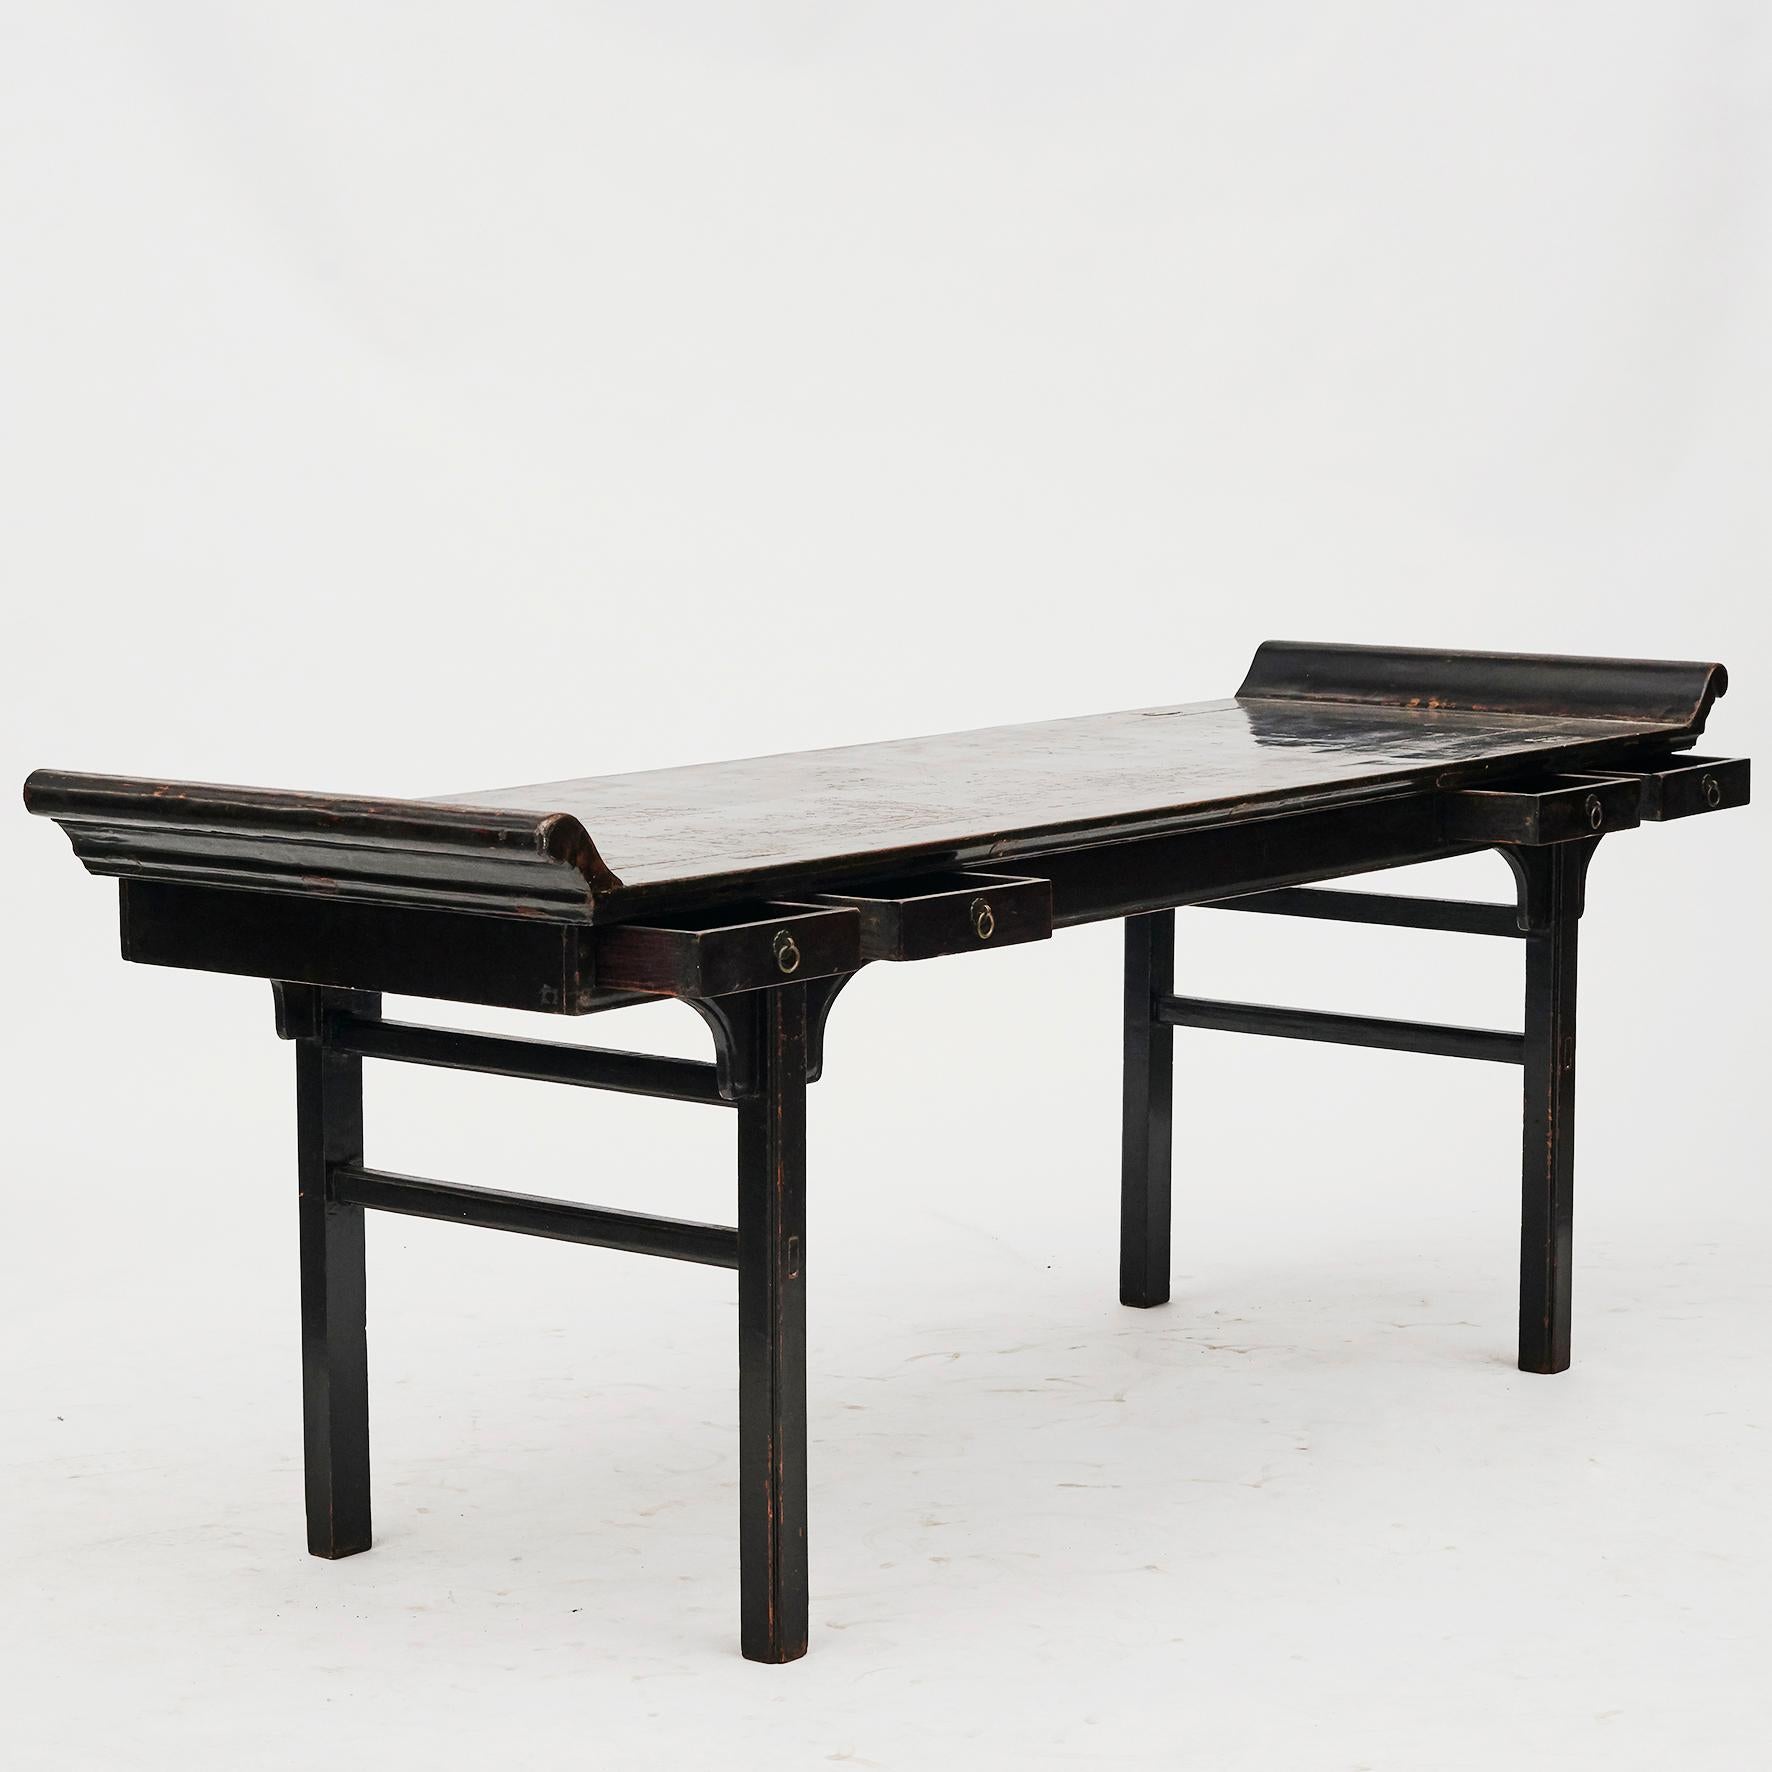 Large Chinese alter table / calligraphy table. Beijing mid-18th century.
Original black lacquer. Table top thick lacquer with natural patina. Walnut with a beautiful age-related patina.
Four drawers at the front.
Has presumably been altar table